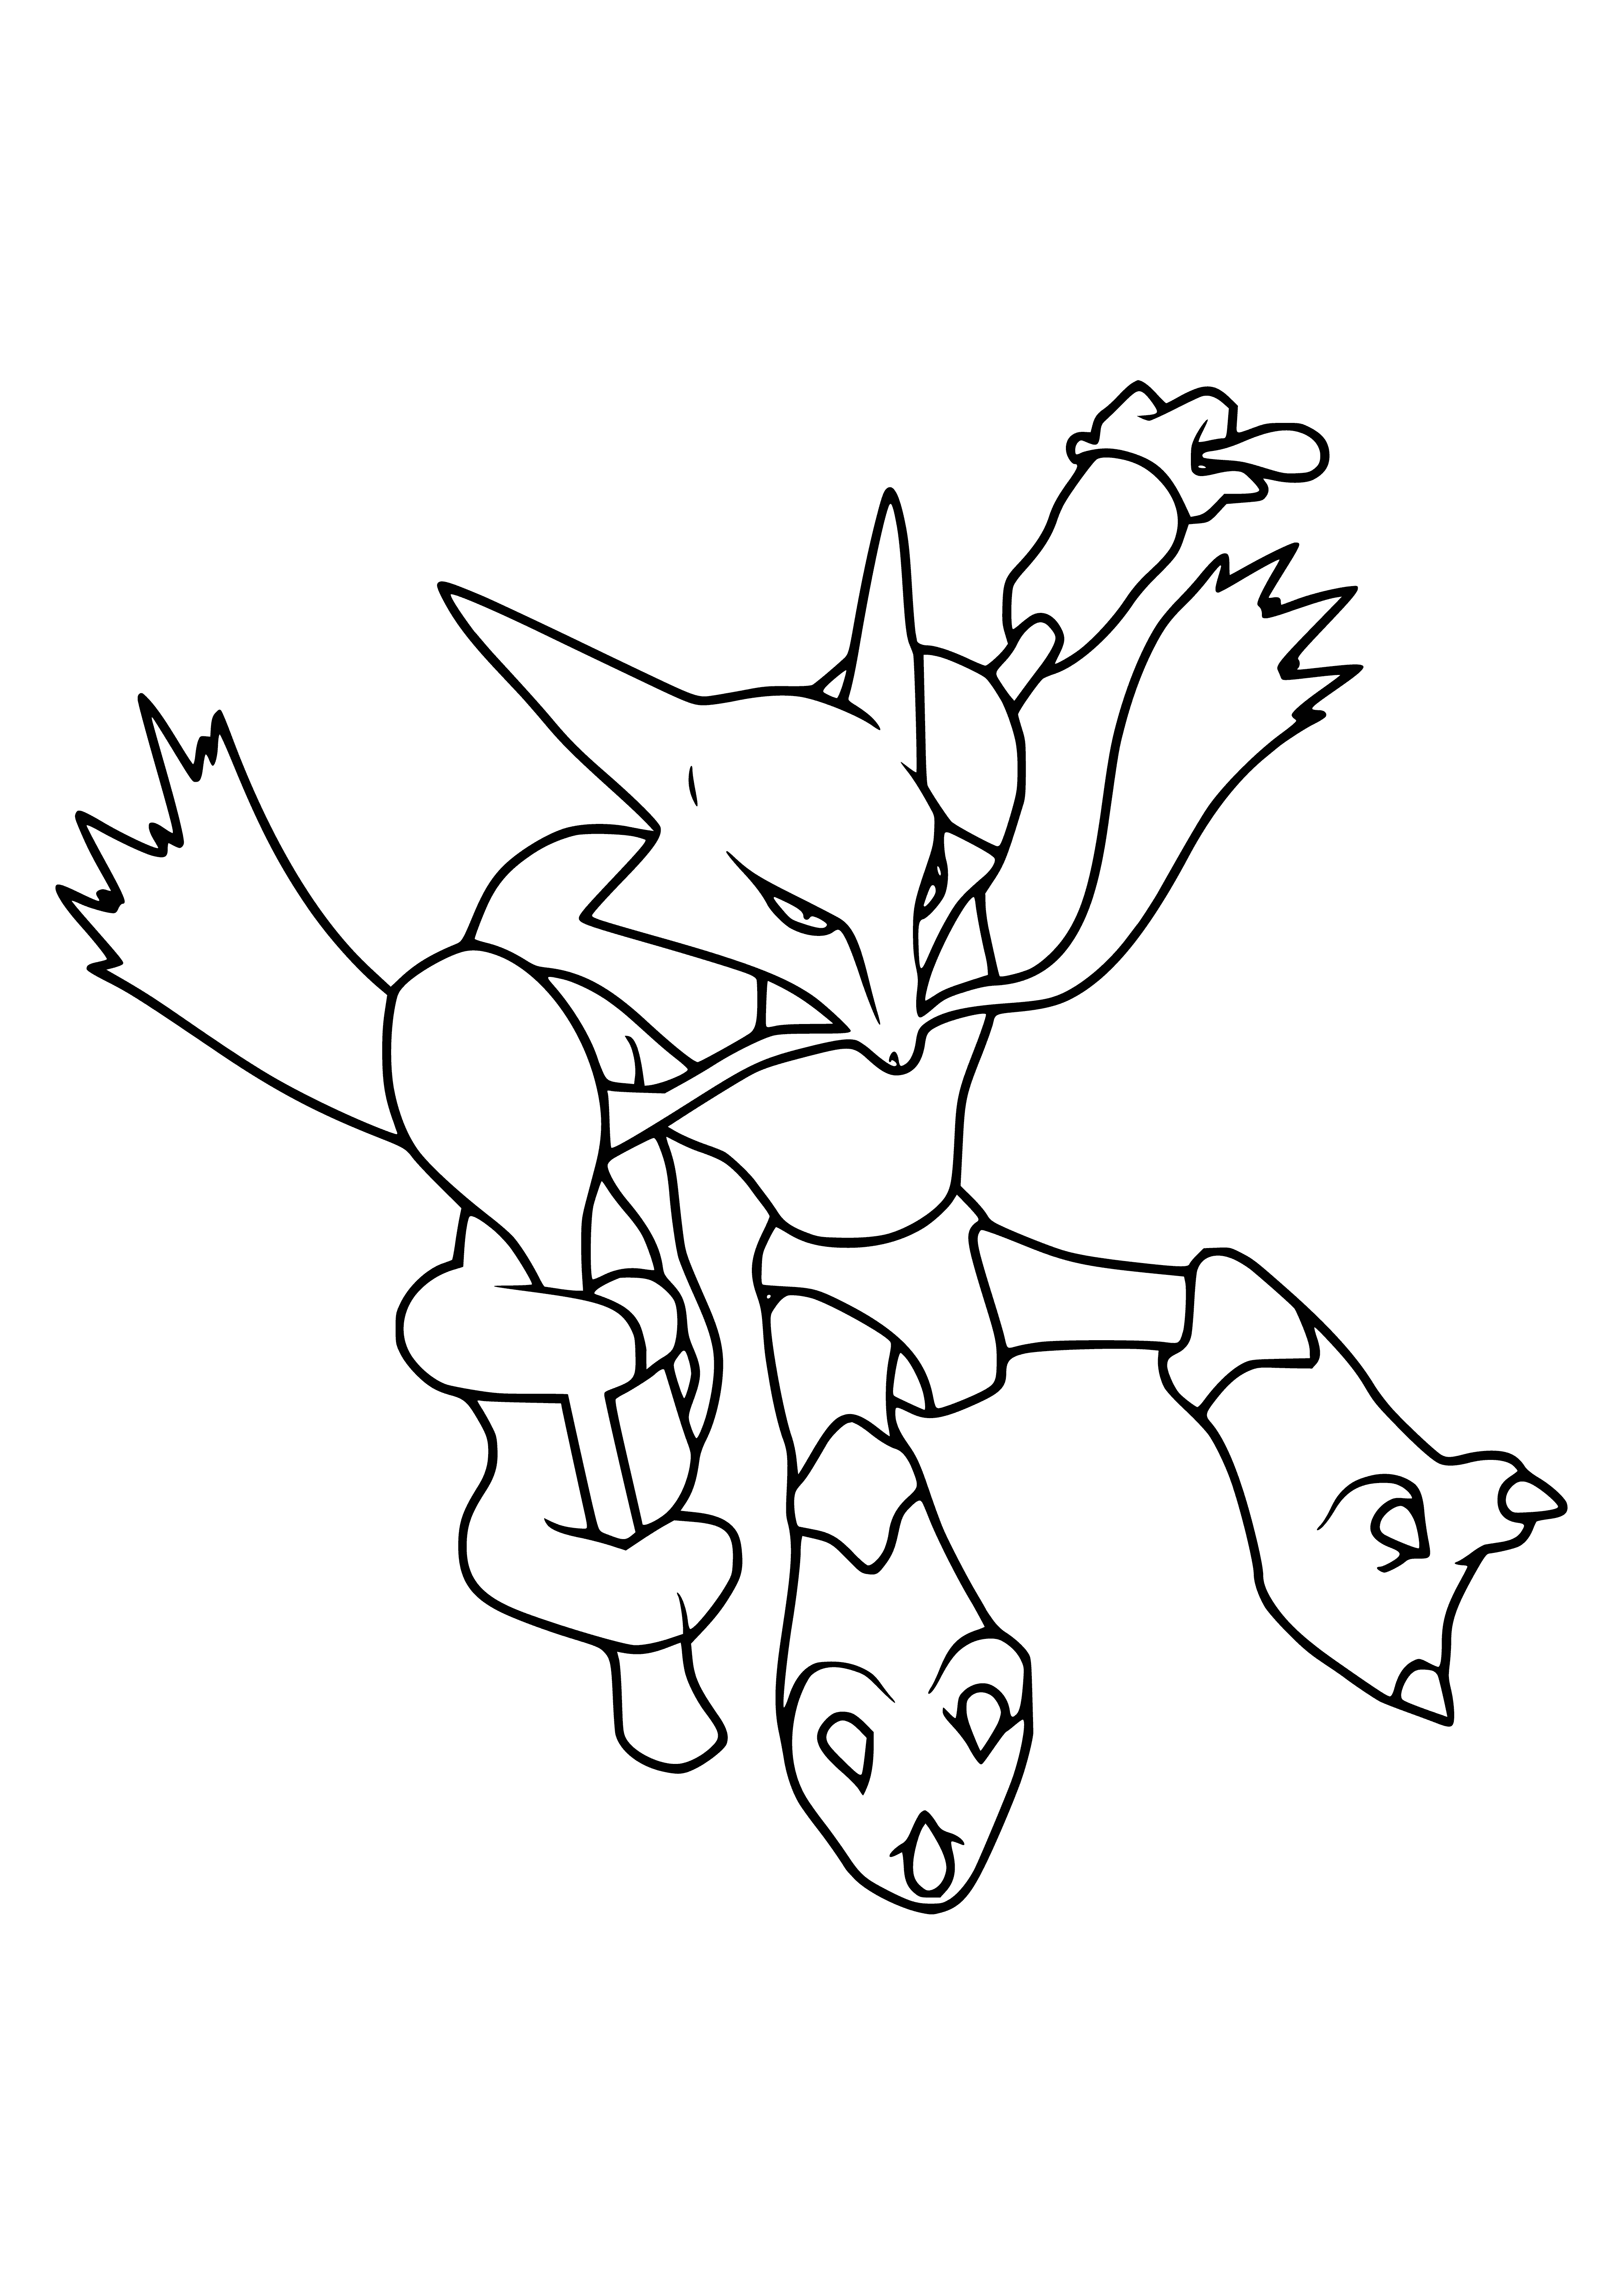 coloring page: Alakazam is a white Psychic-type Pokemon. It has a large head, big eyes, and a four slender limbs. It has a black stripe running down its back and a large crest on its head.